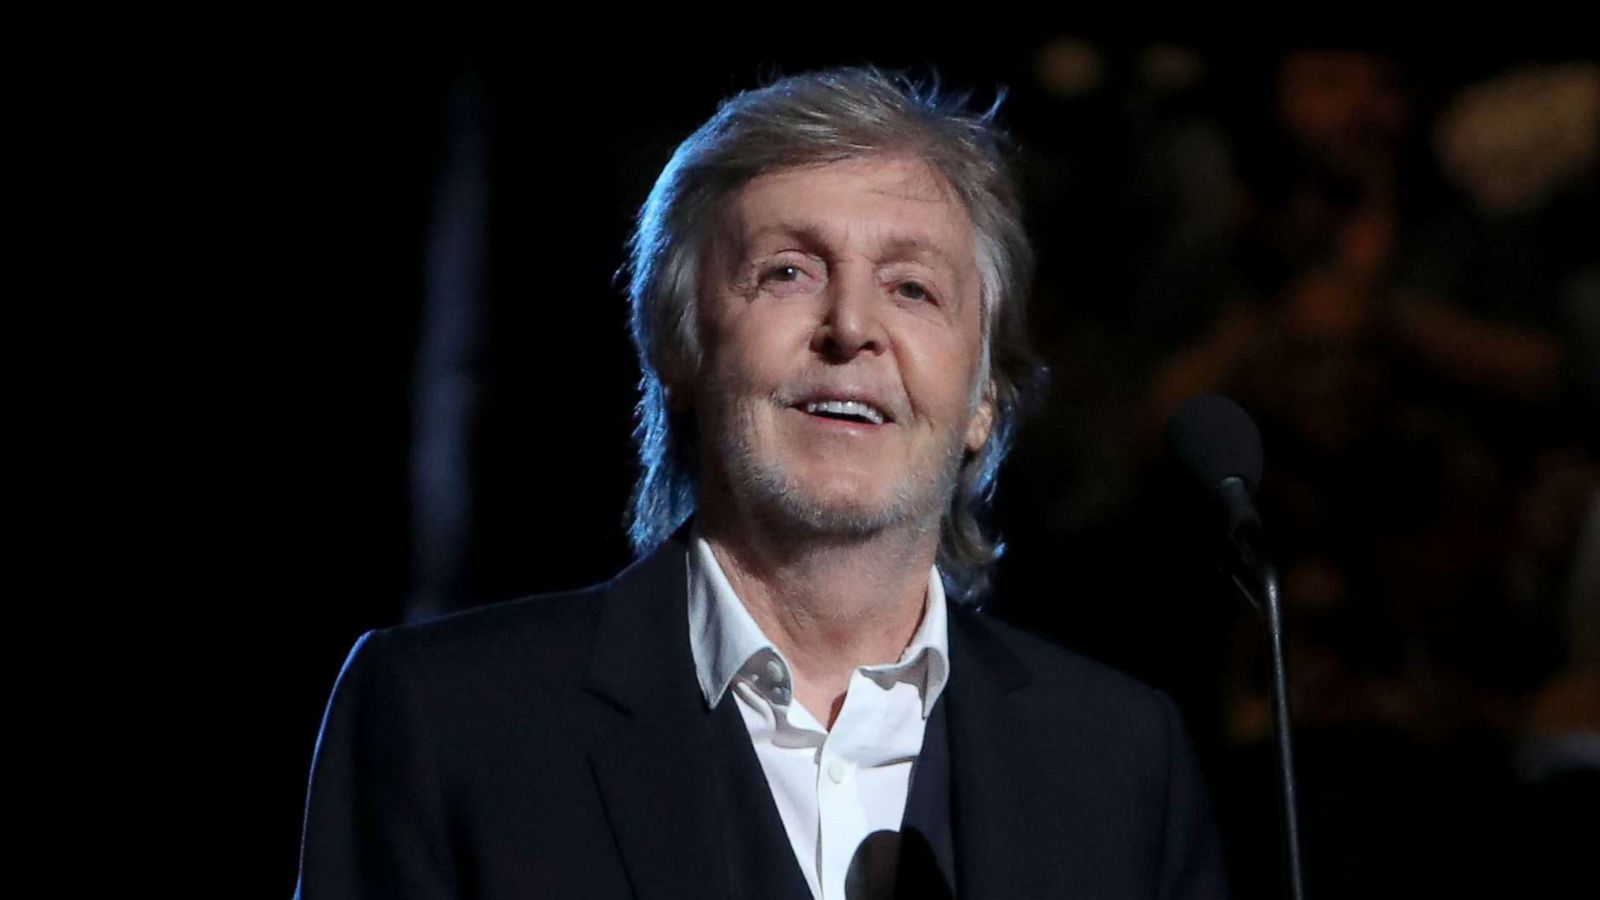 PHOTO: Paul McCartney performs onstage during the 36th Annual Rock & Roll Hall Of Fame Induction Ceremony at Rocket Mortgage Fieldhouse, Oct. 30, 2021 in Cleveland, Ohio.